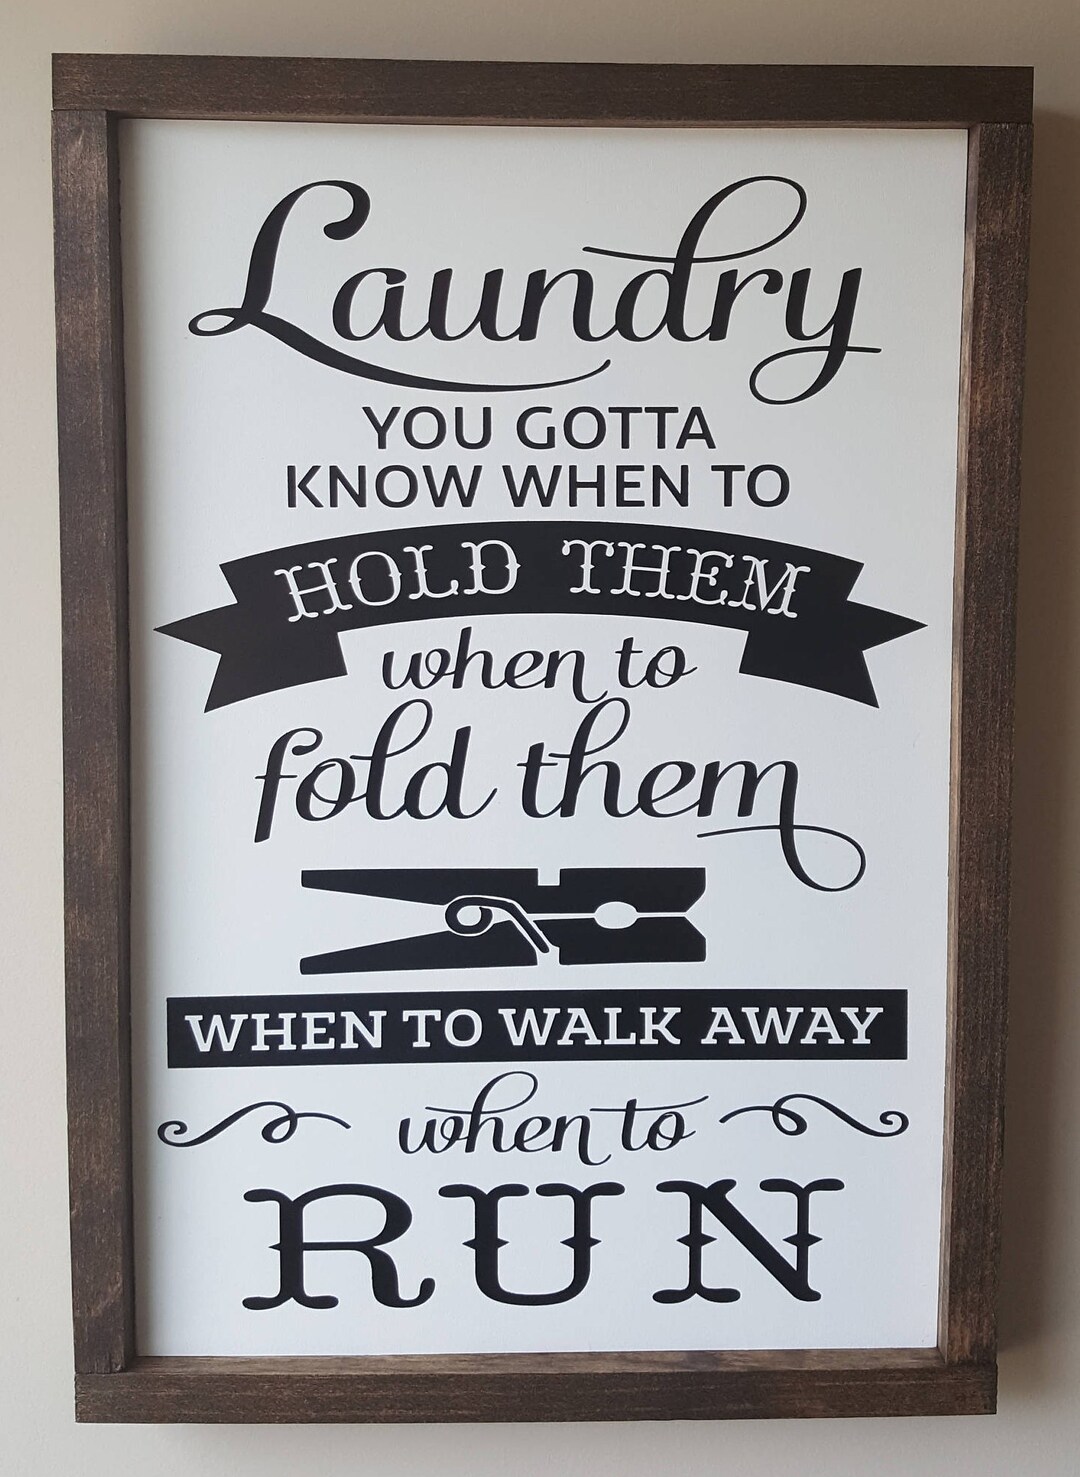 Framed Wood Sign laundry Know When to Hold Them When - Etsy